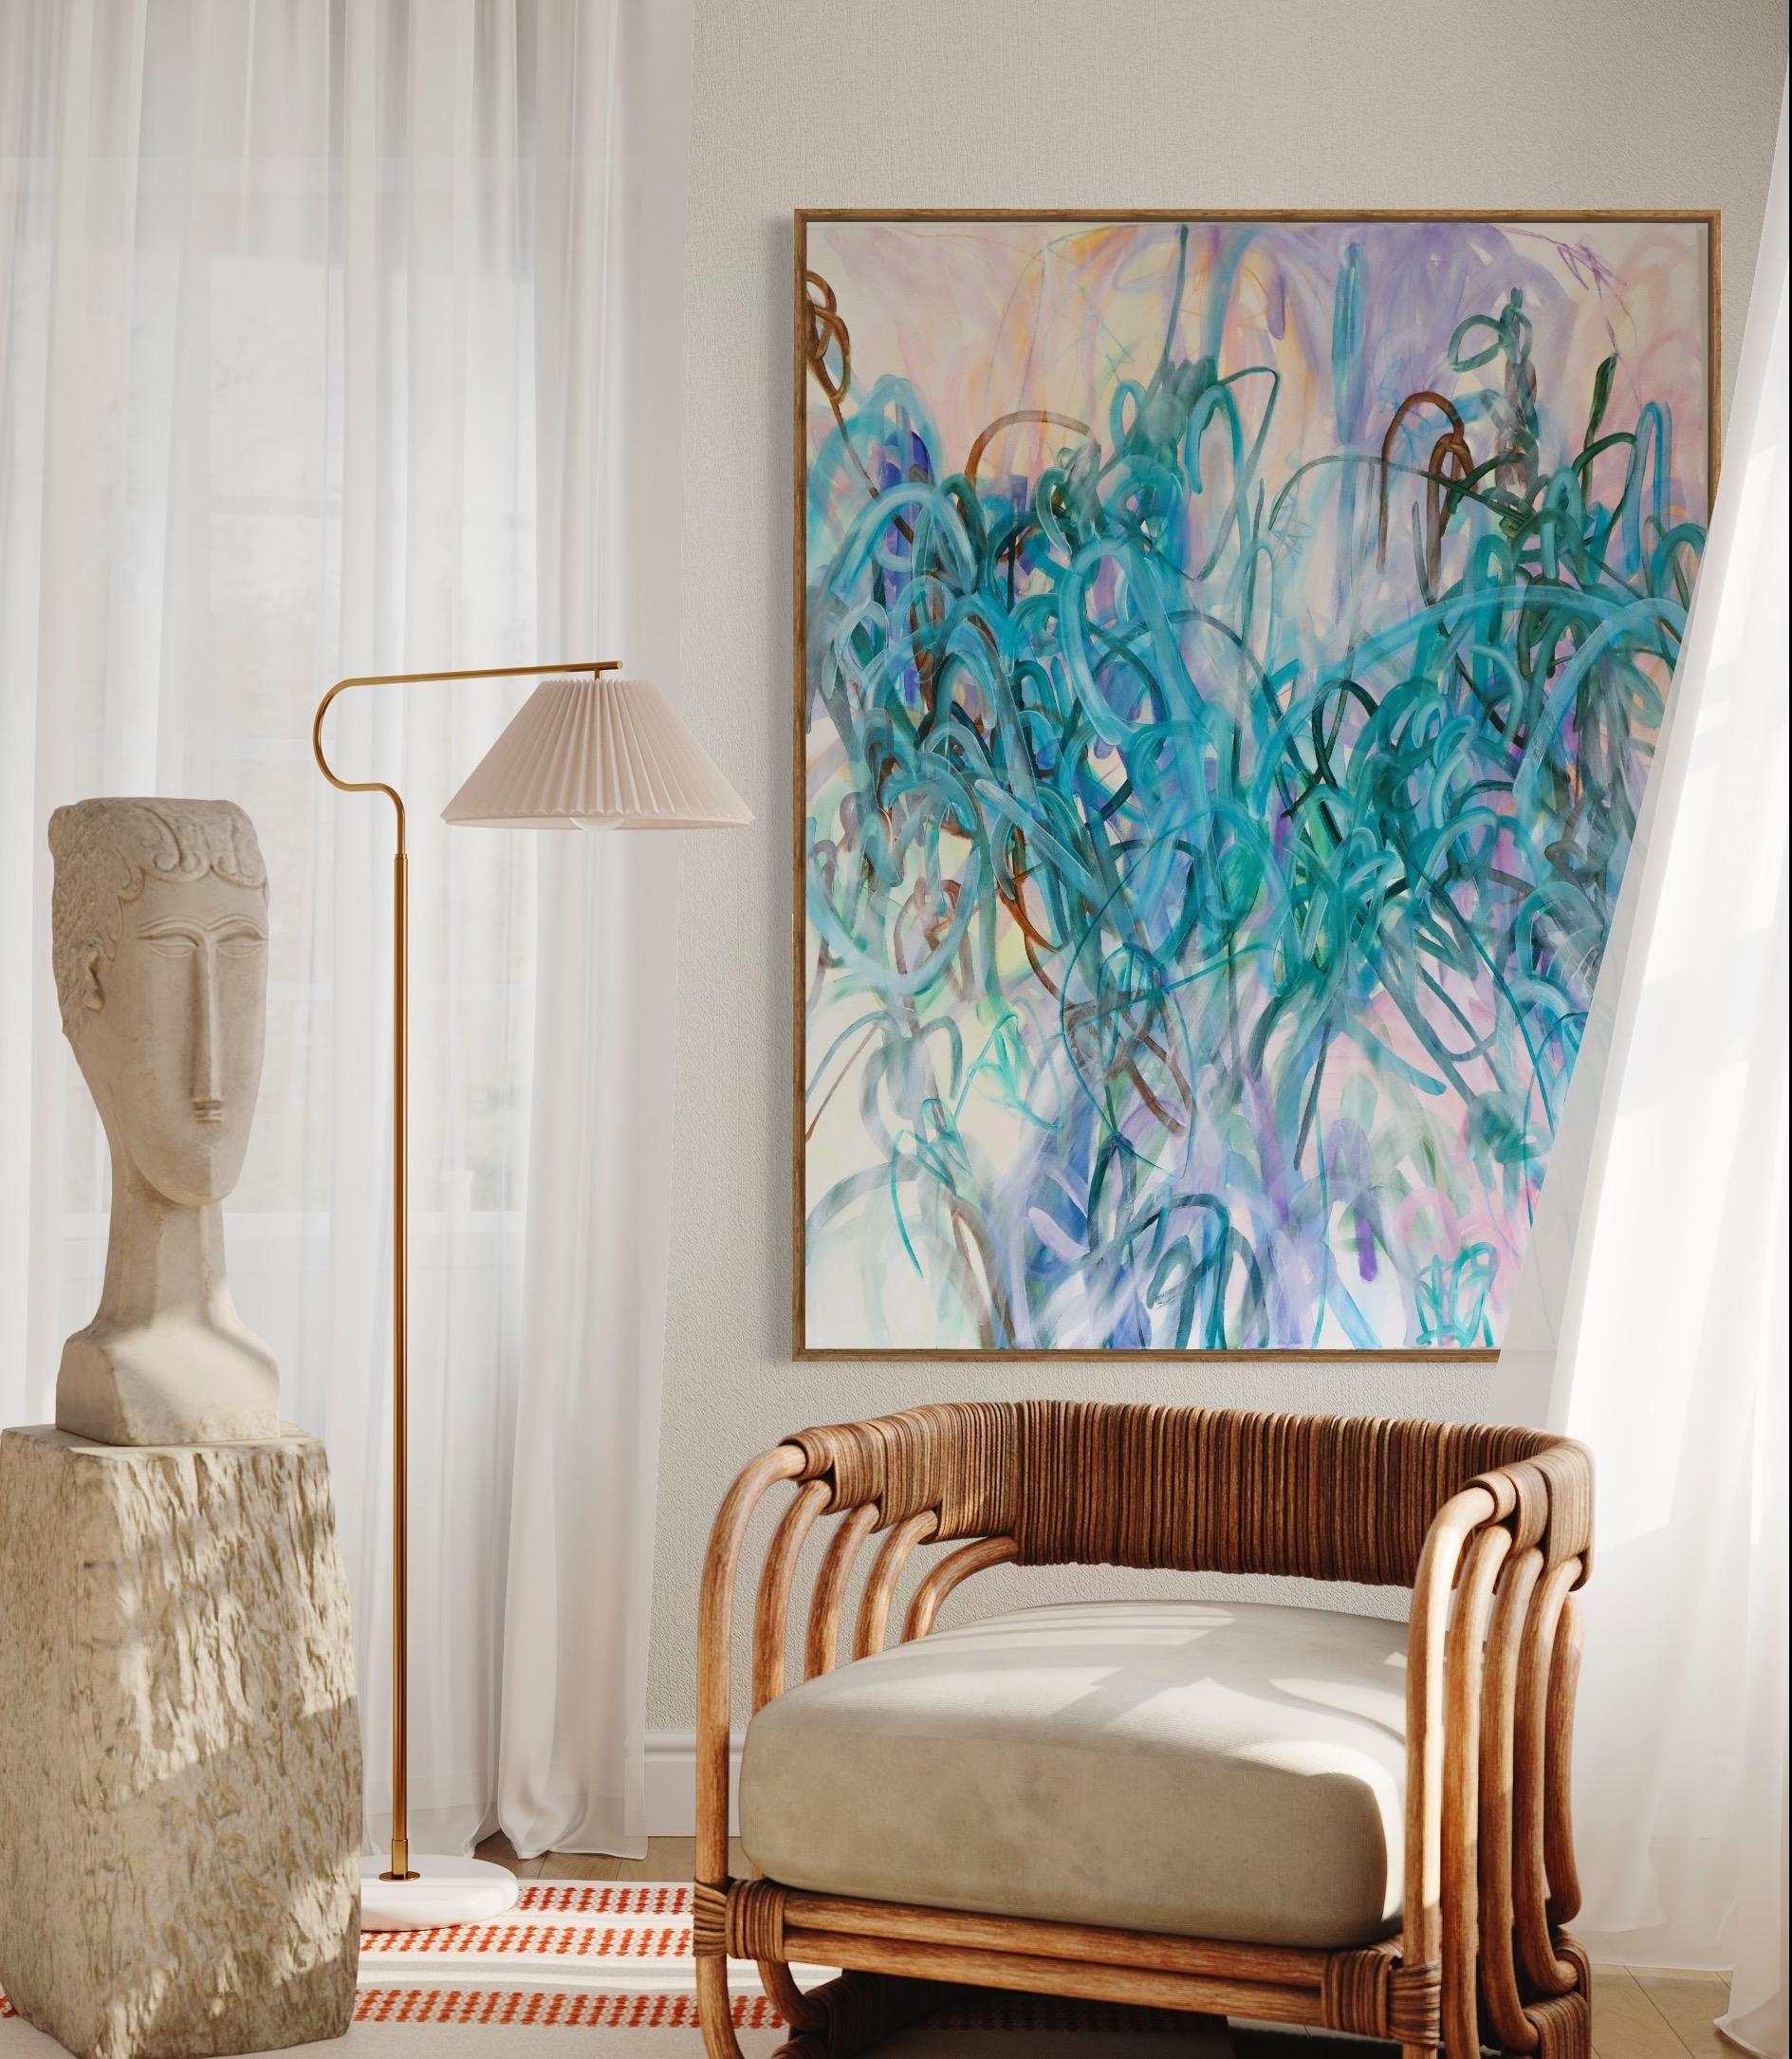 Contemporary abstract painting made with oil, acrylics, and oil pastels on canvas by Swedish artist Elin Kereby. Her vibrant oil and mixed media paintings composed of layered lines are mirroring how she sees the world; made up by layers upon layers